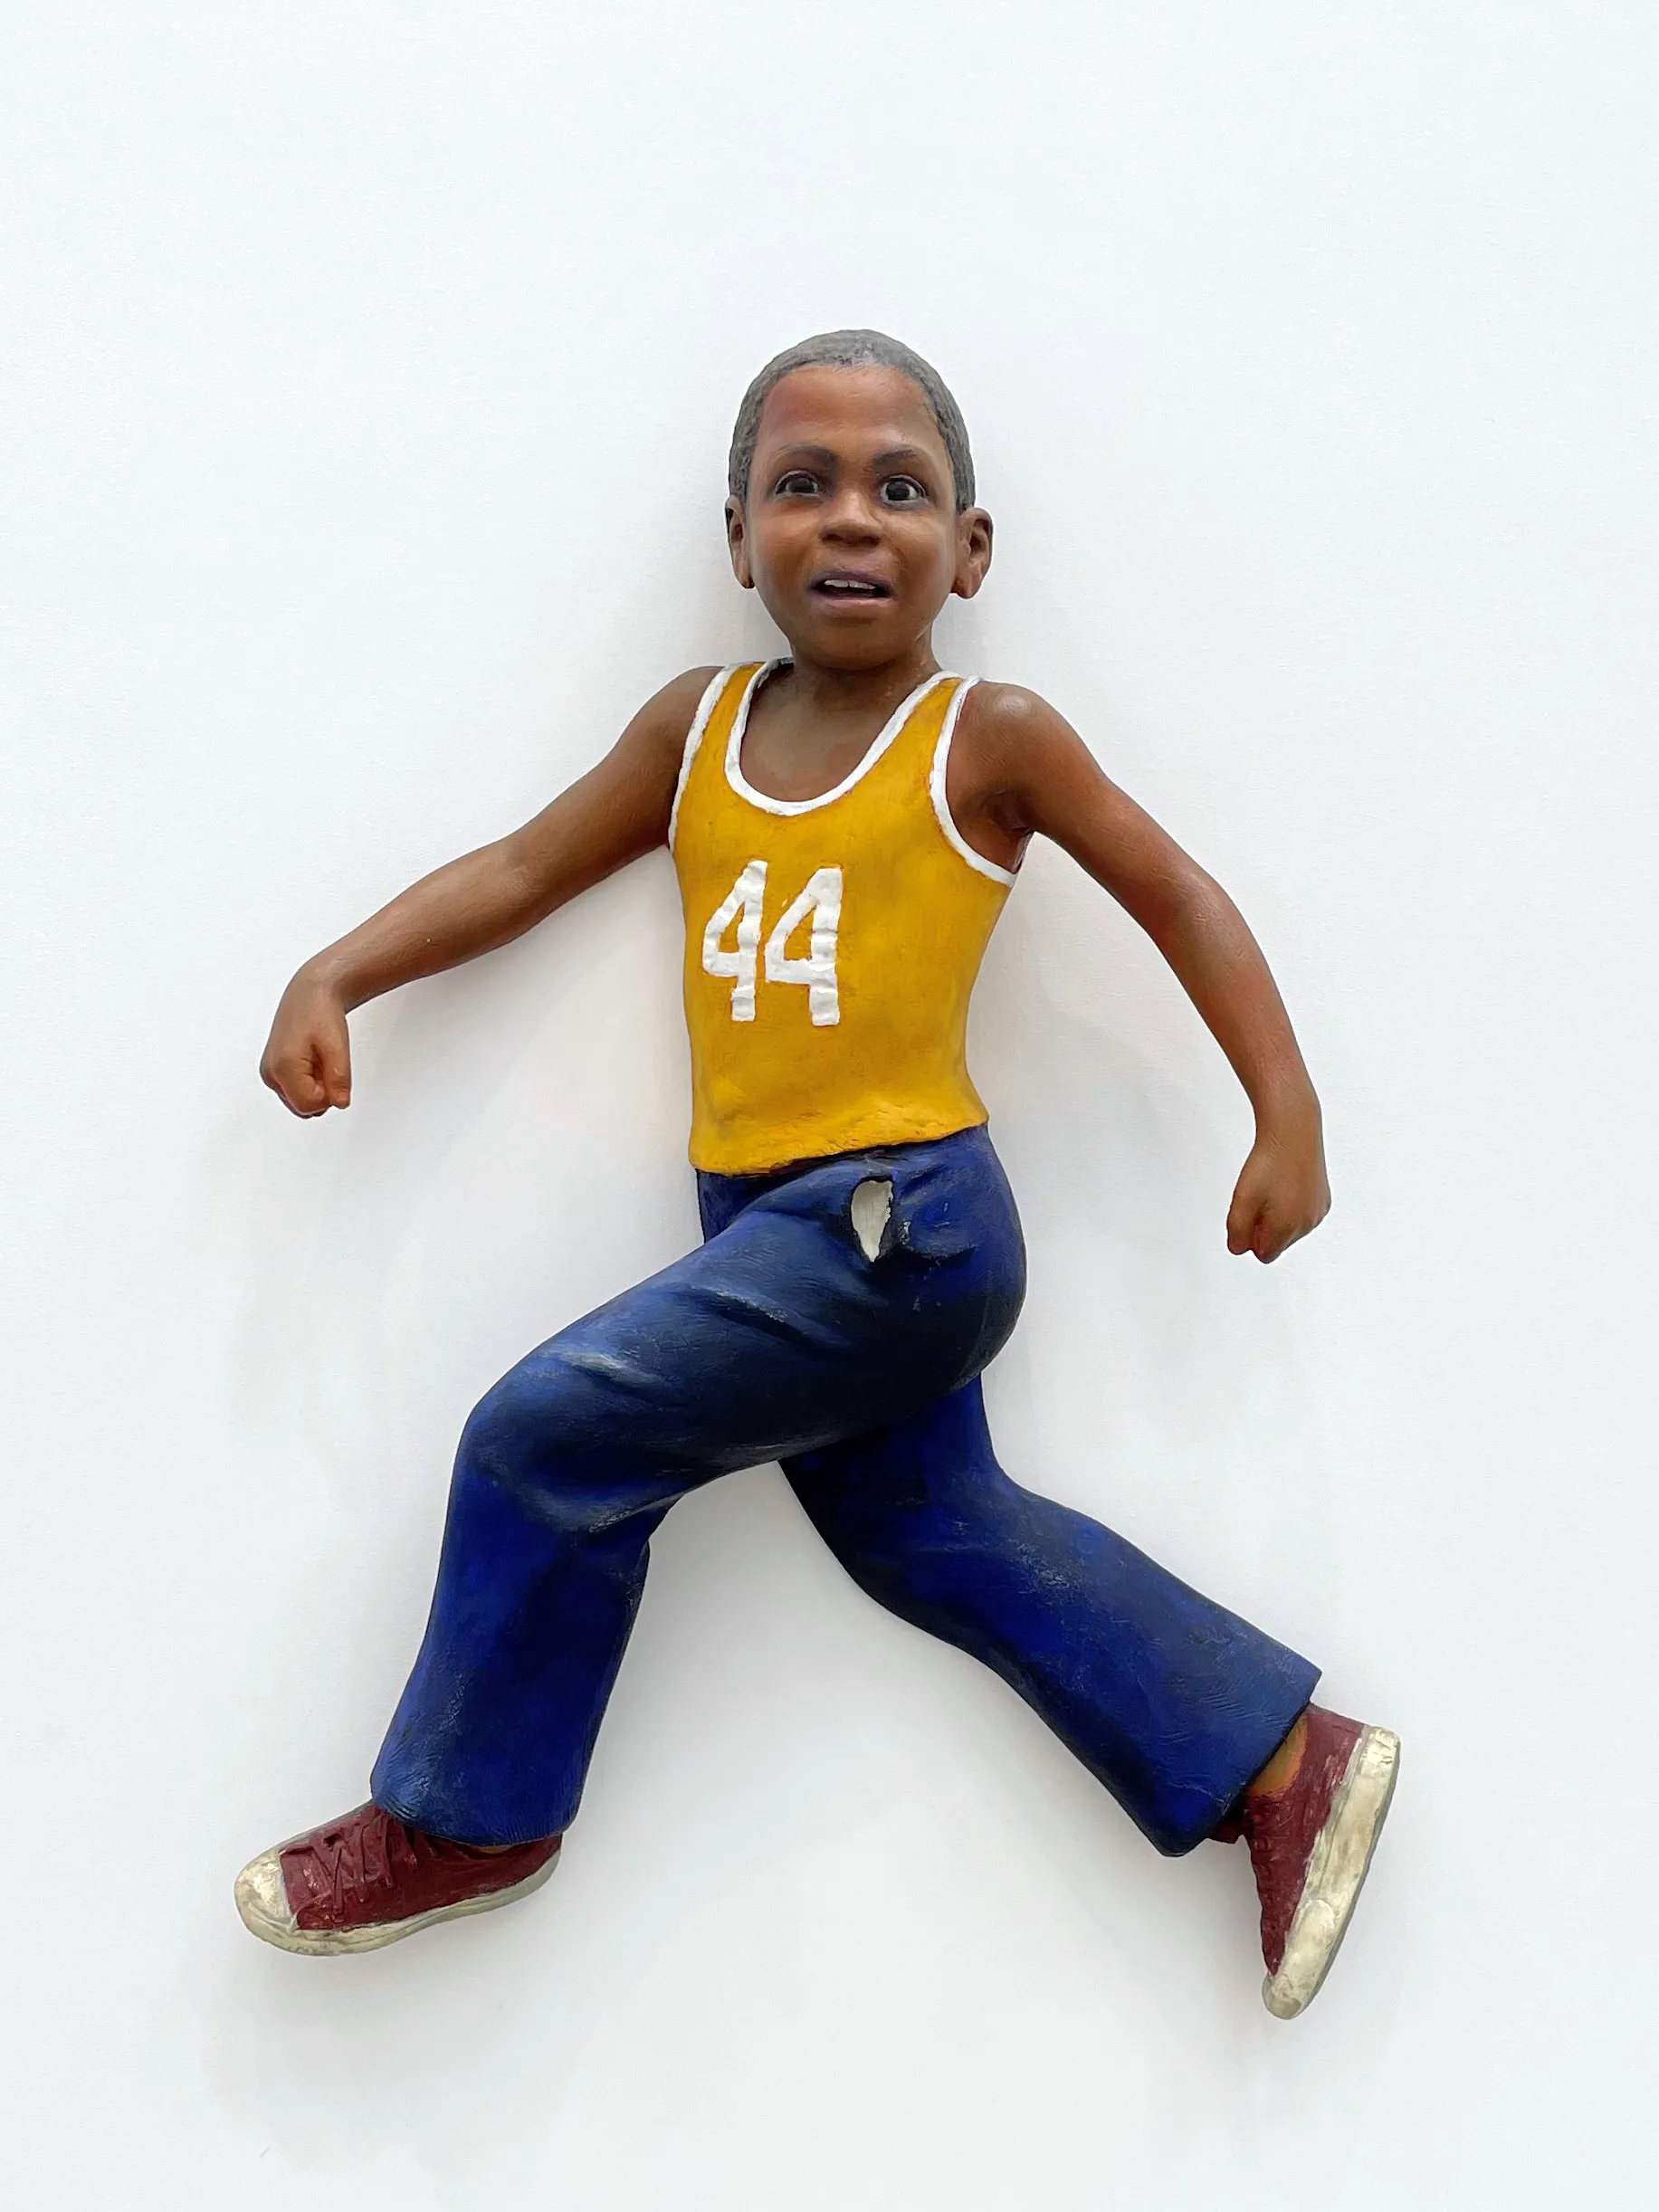 wall sculpture of a boy with a dark skin tone wearing a yellow jersey and blue jeans